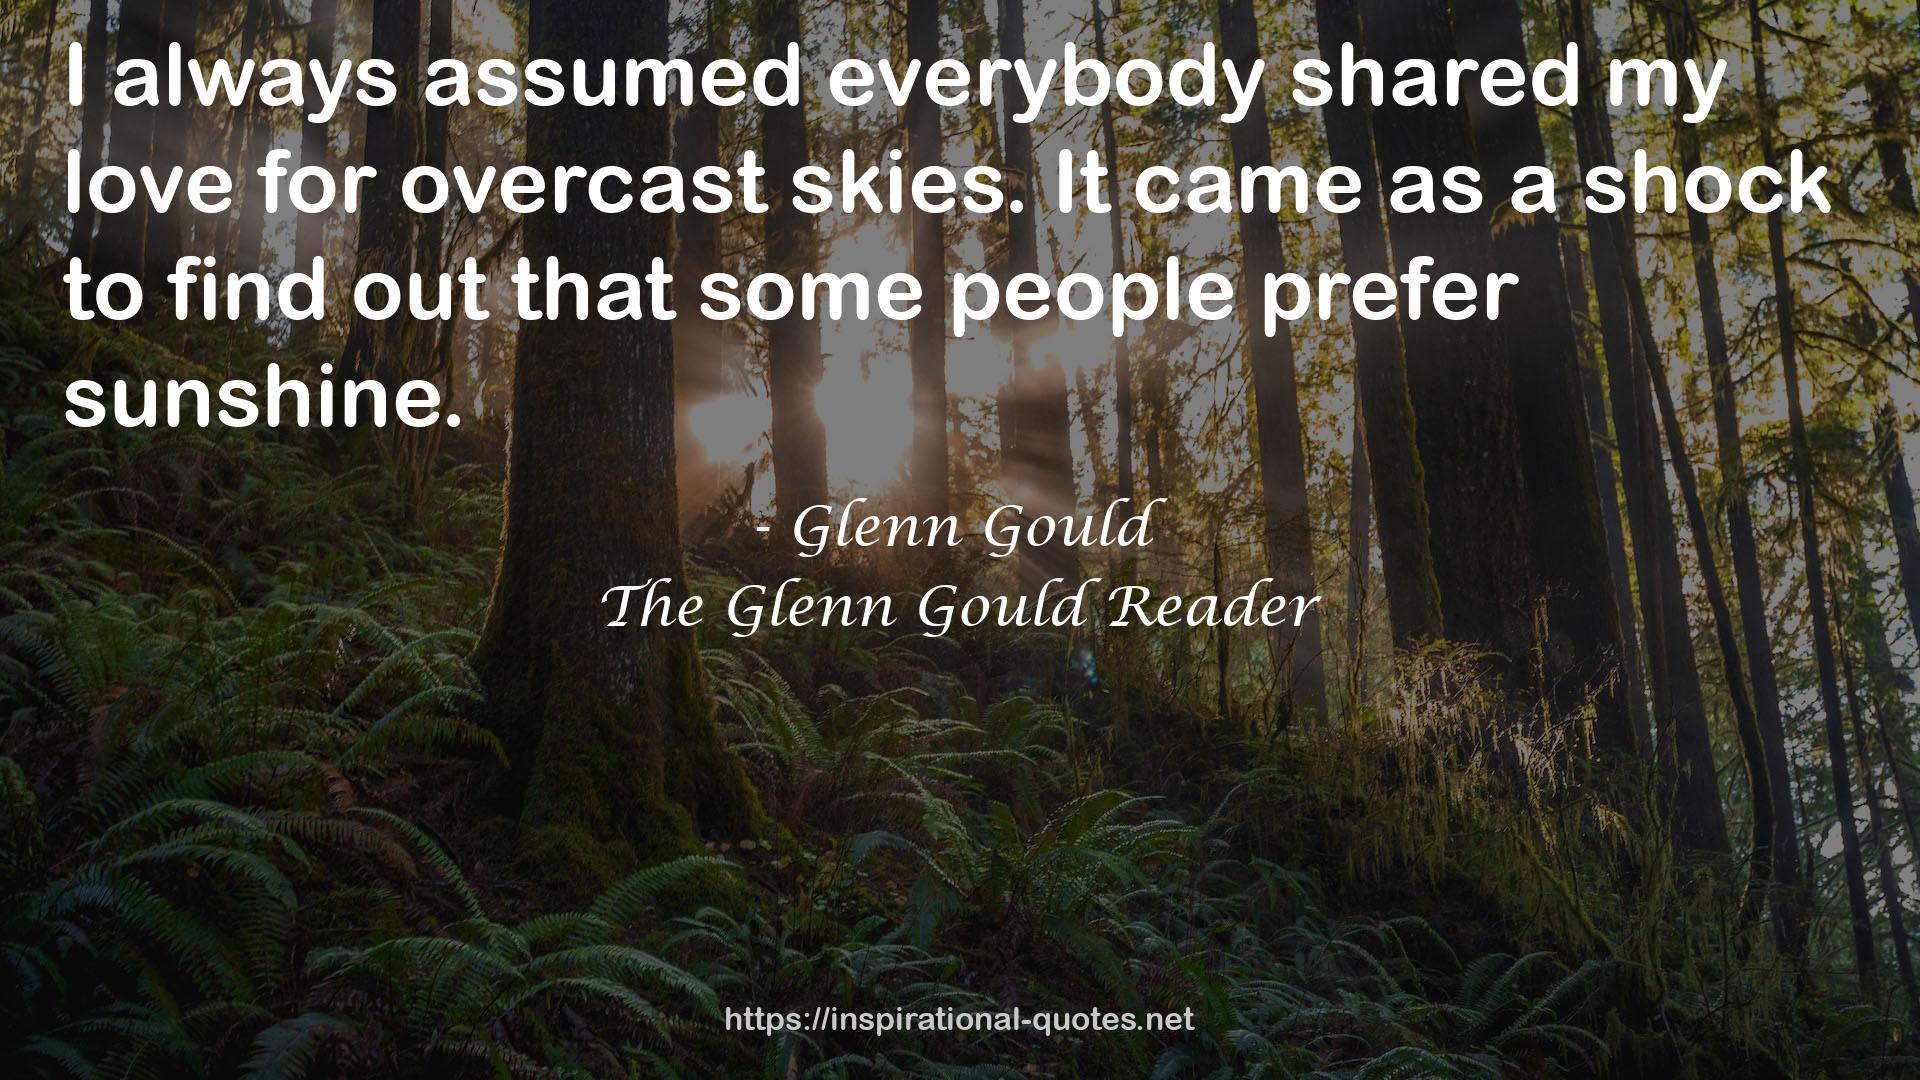 The Glenn Gould Reader QUOTES